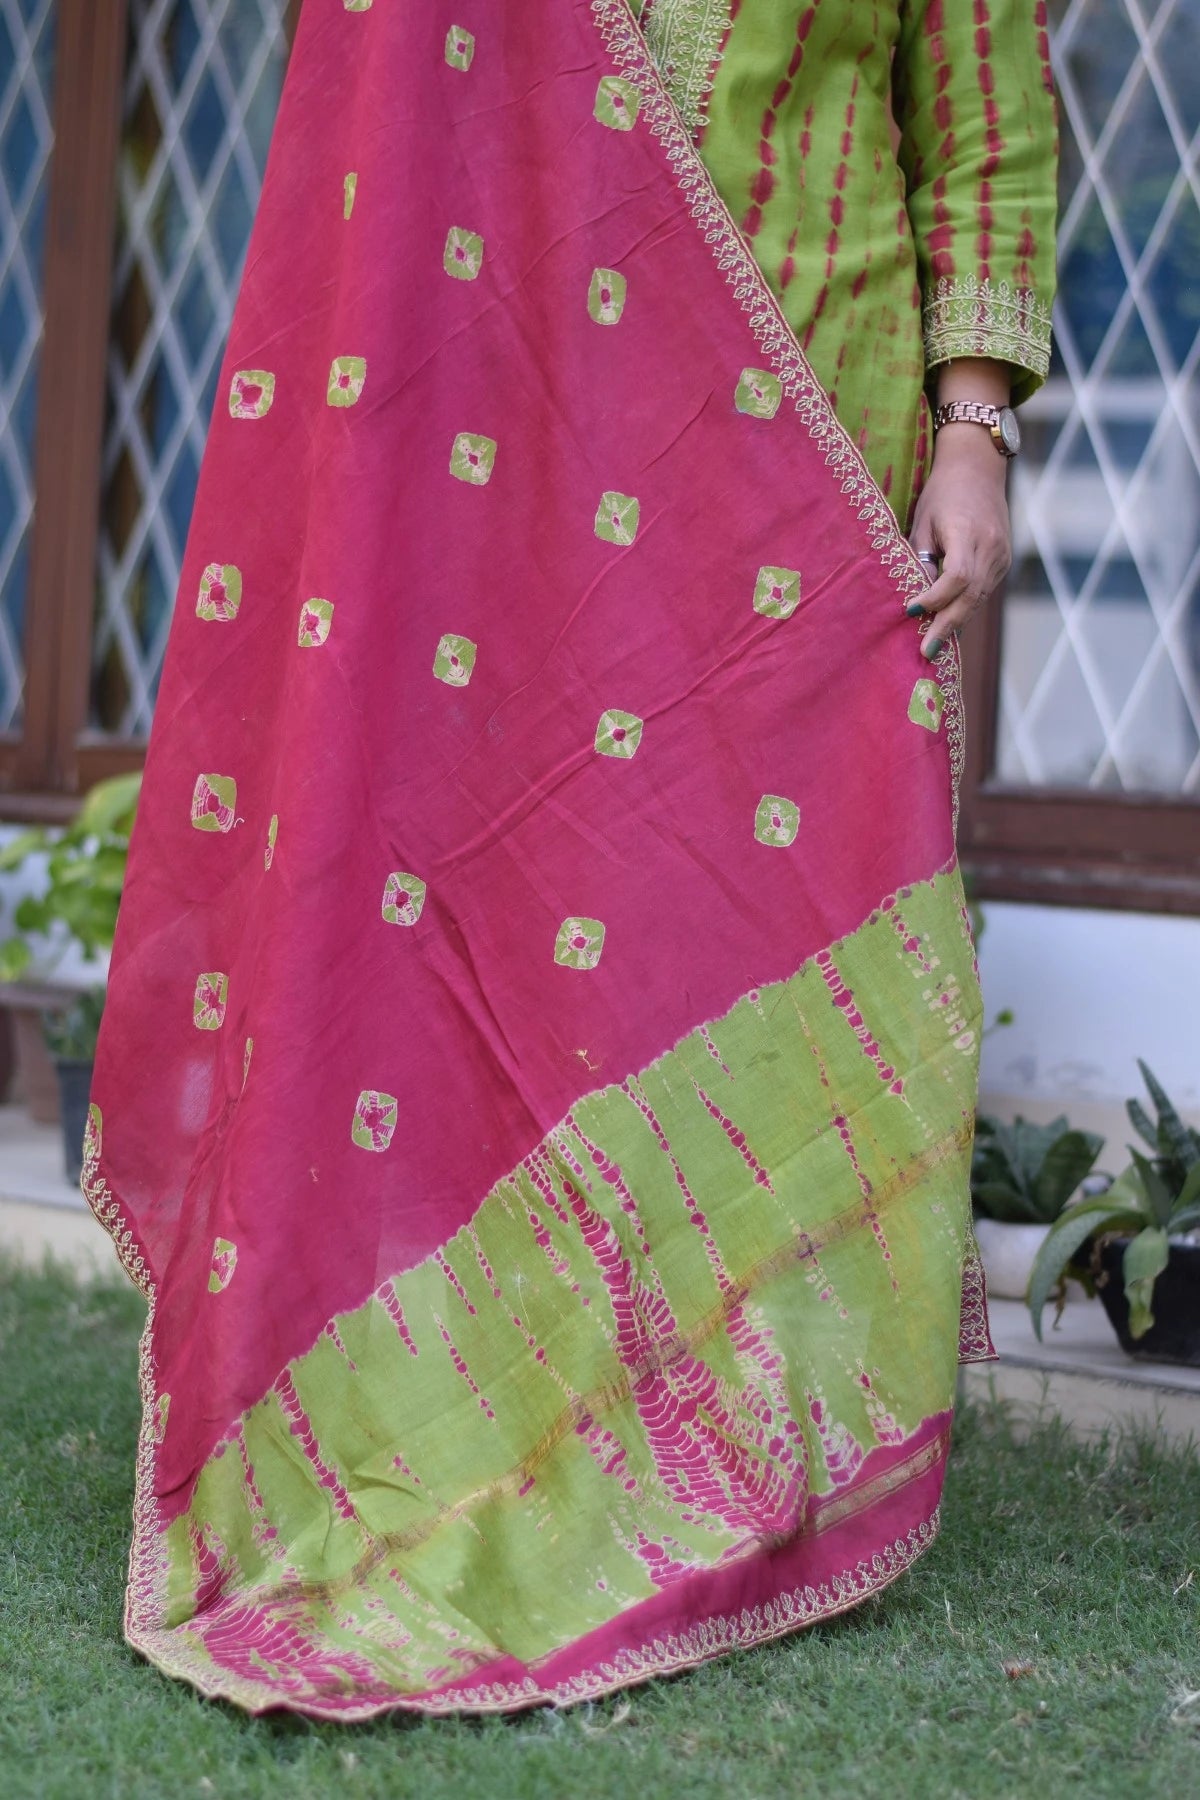 An elegant woman wearing a traditional zari hand work suit with intricate floral designs.